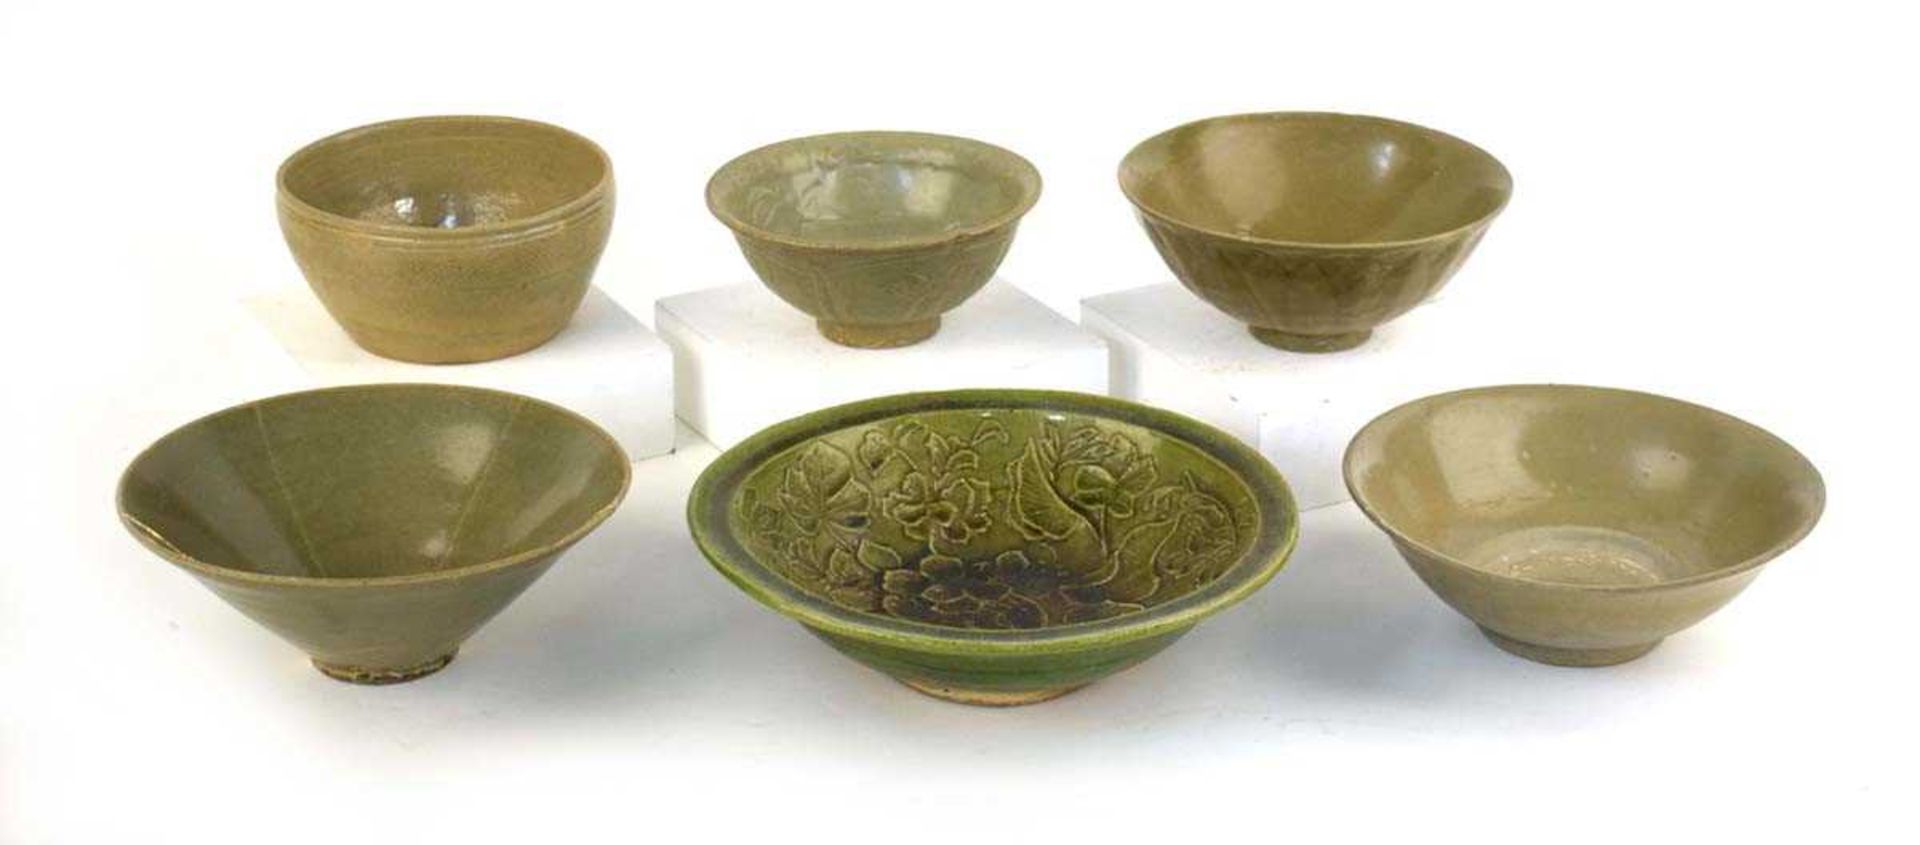 A Chinese celadon bowl of circular form repaired with the Kintsugi technique, d. 19.5 cm, h. 7.5 cm,